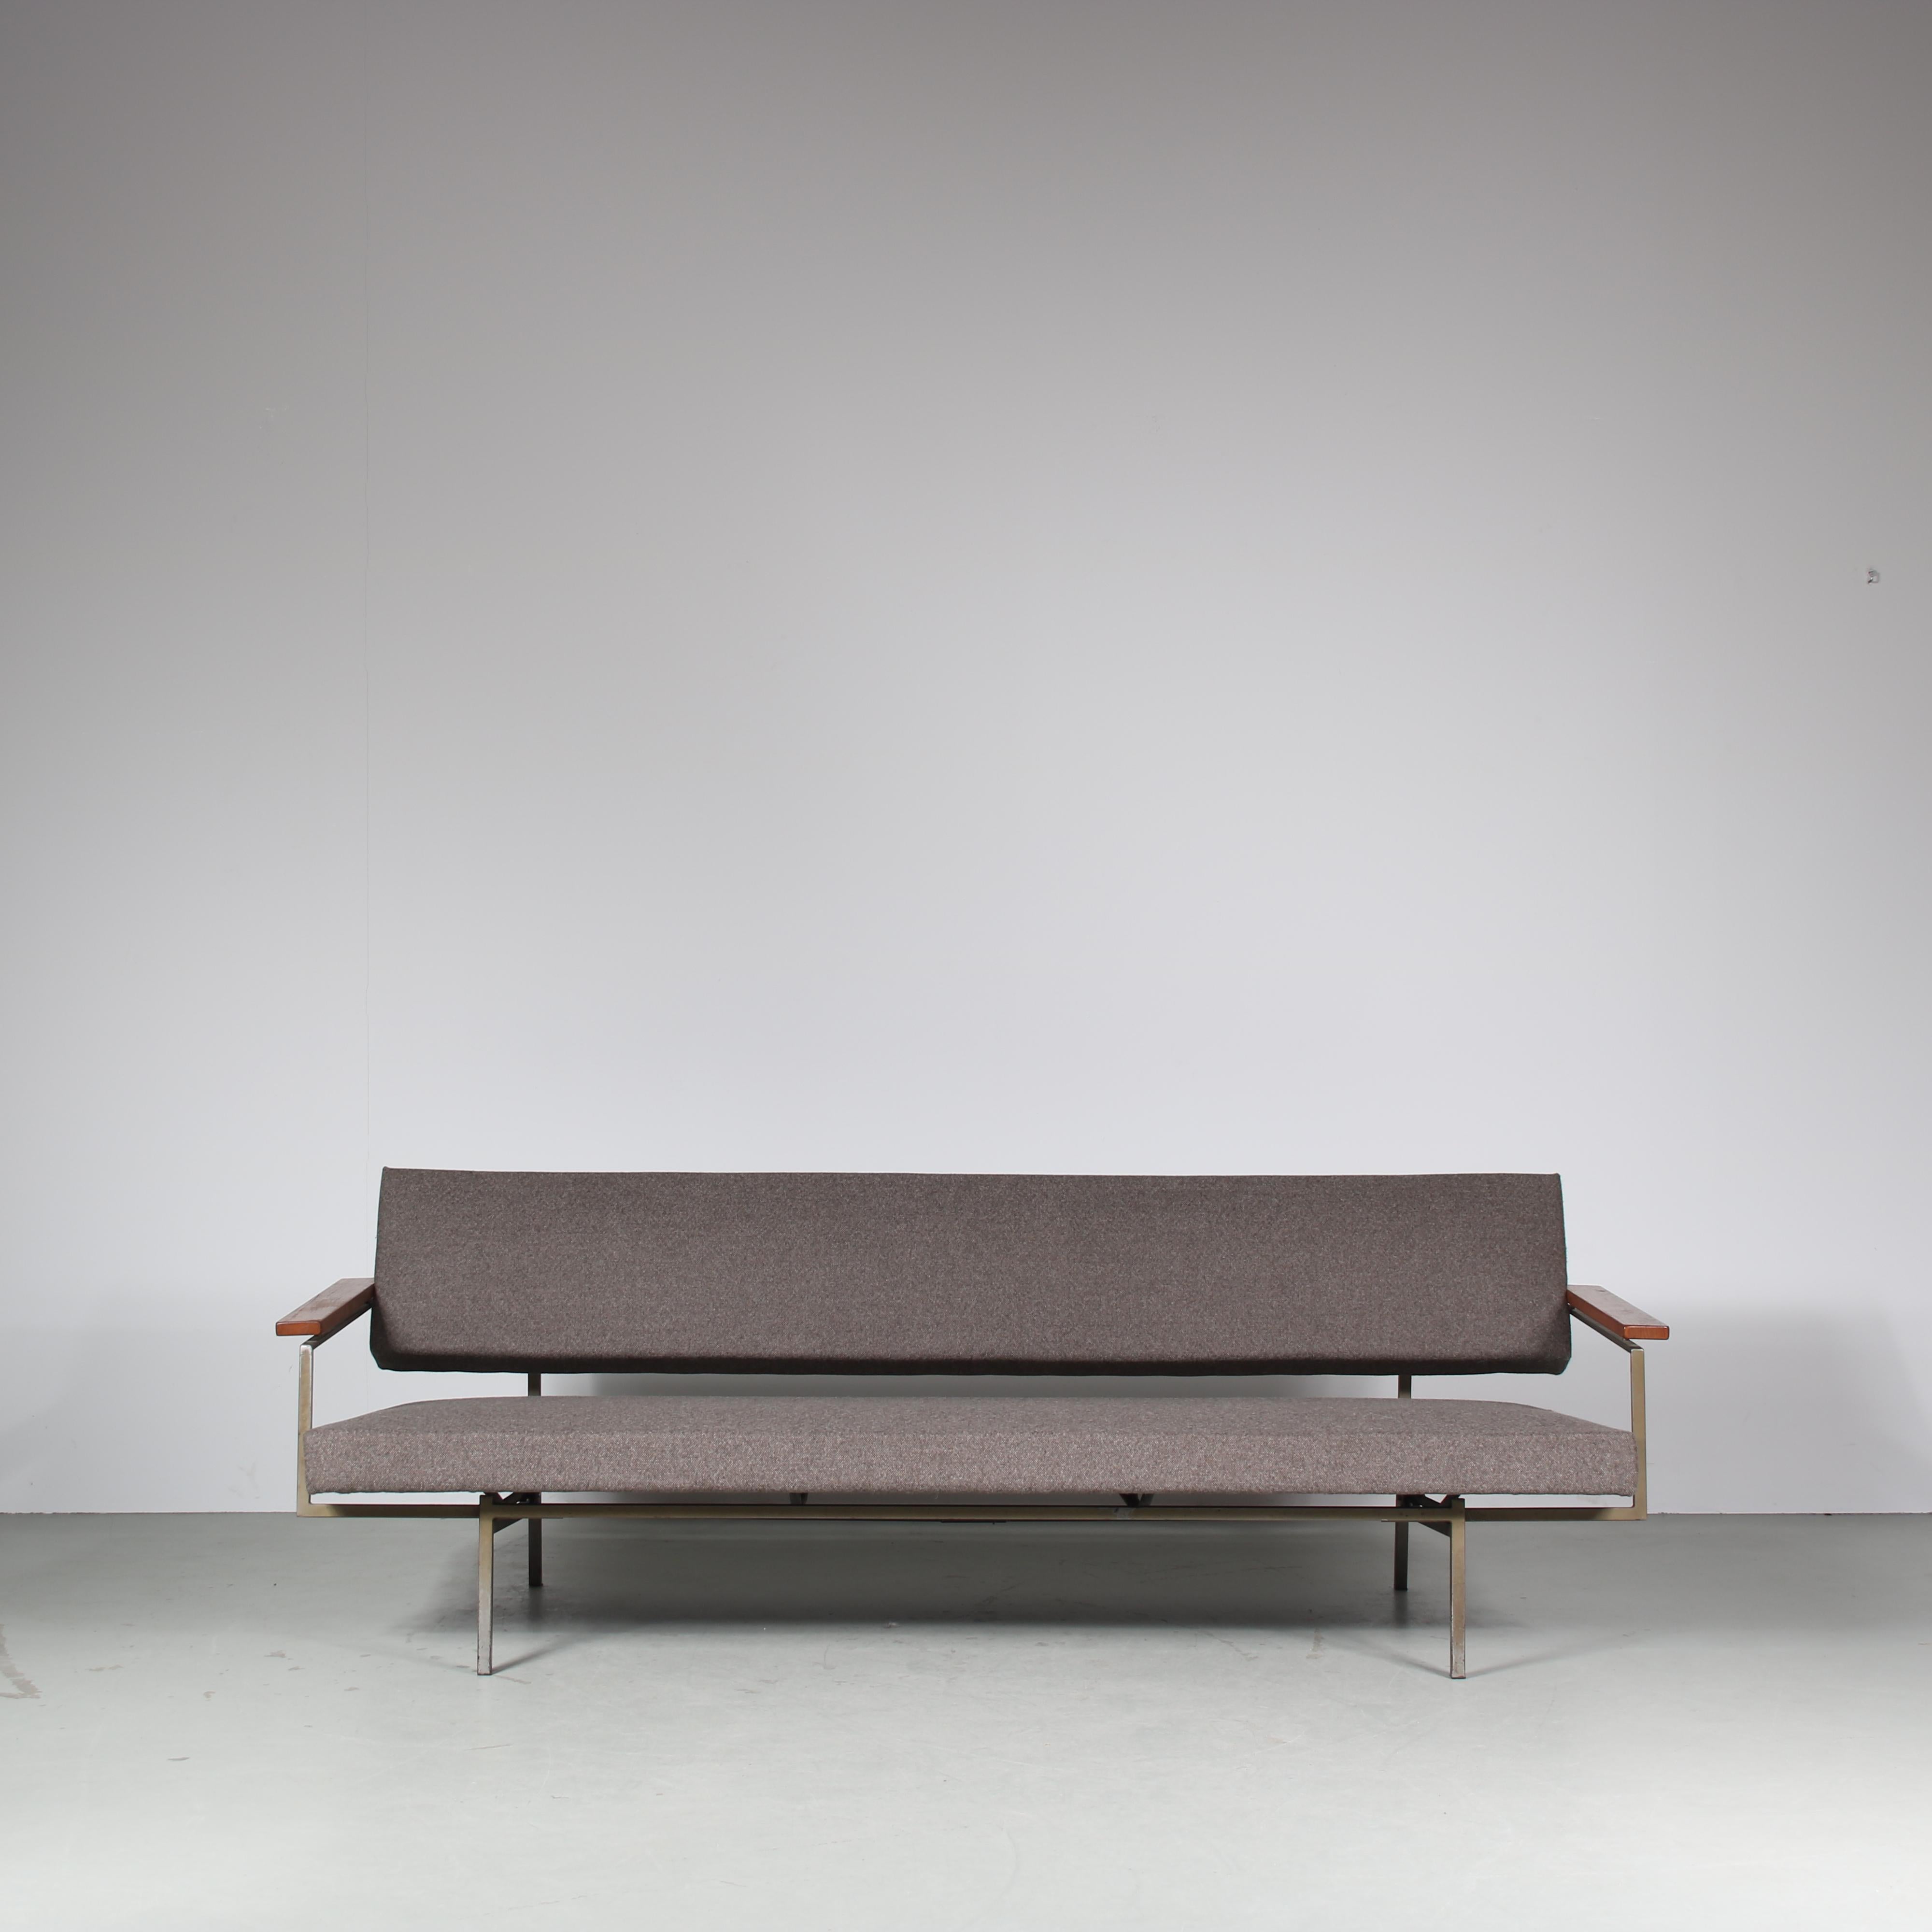 Mid-20th Century Sleeping Sofa by Rob Parry for Gelderland, Netherlands 1960 For Sale